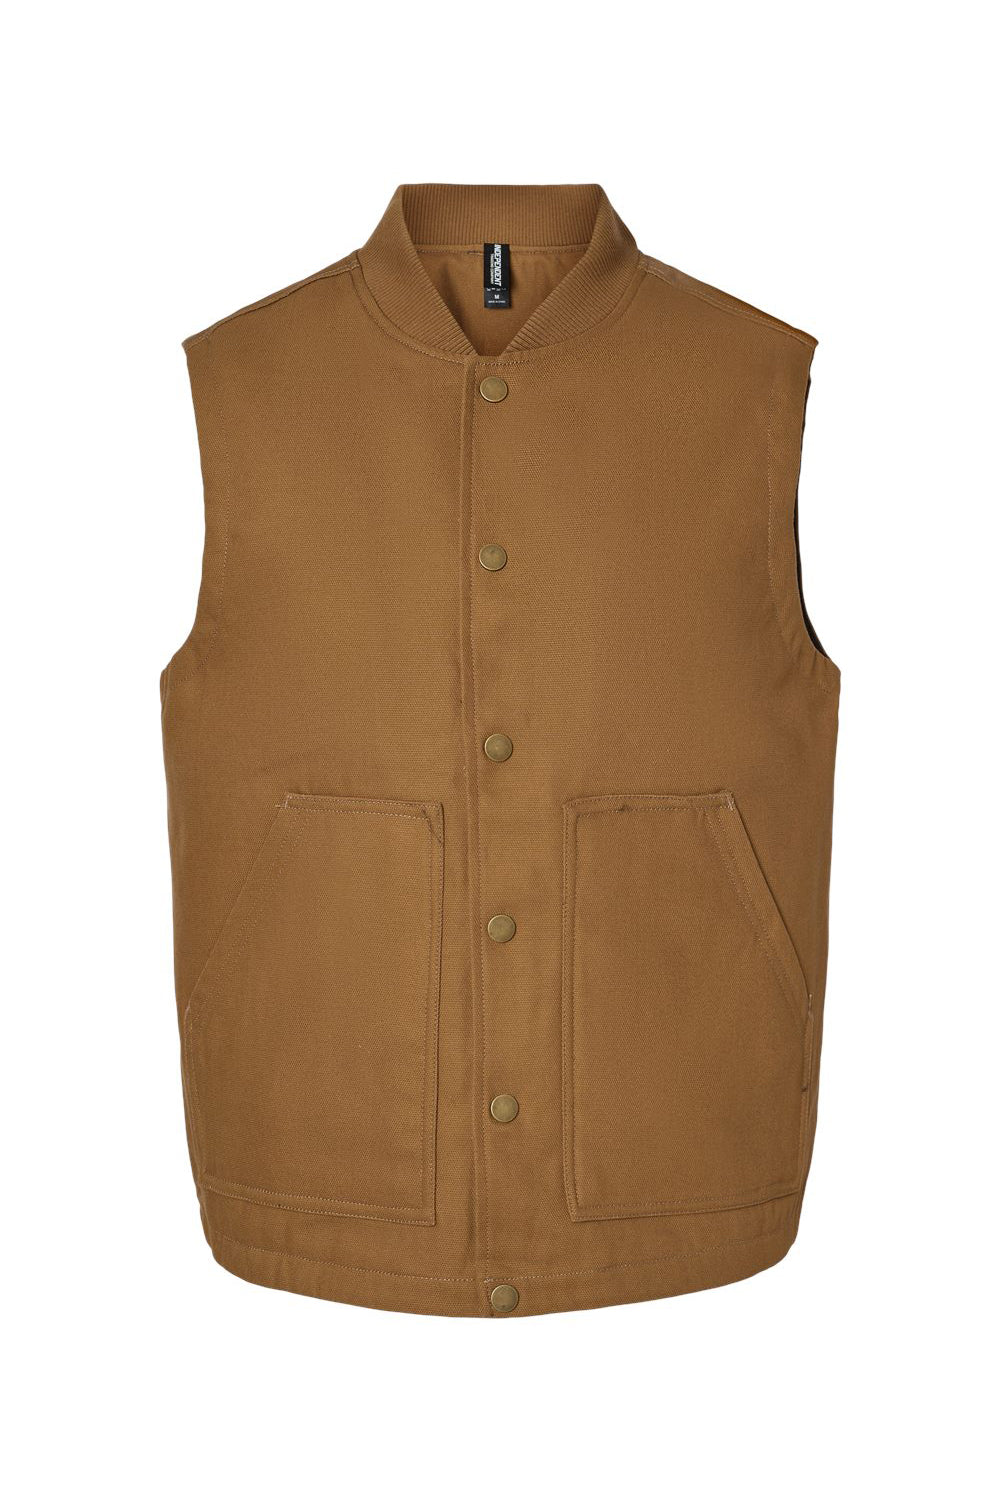 Independent Trading Co. EXP560V Mens Insulated Canvas Full Zip Vest Saddle Brown Flat Front